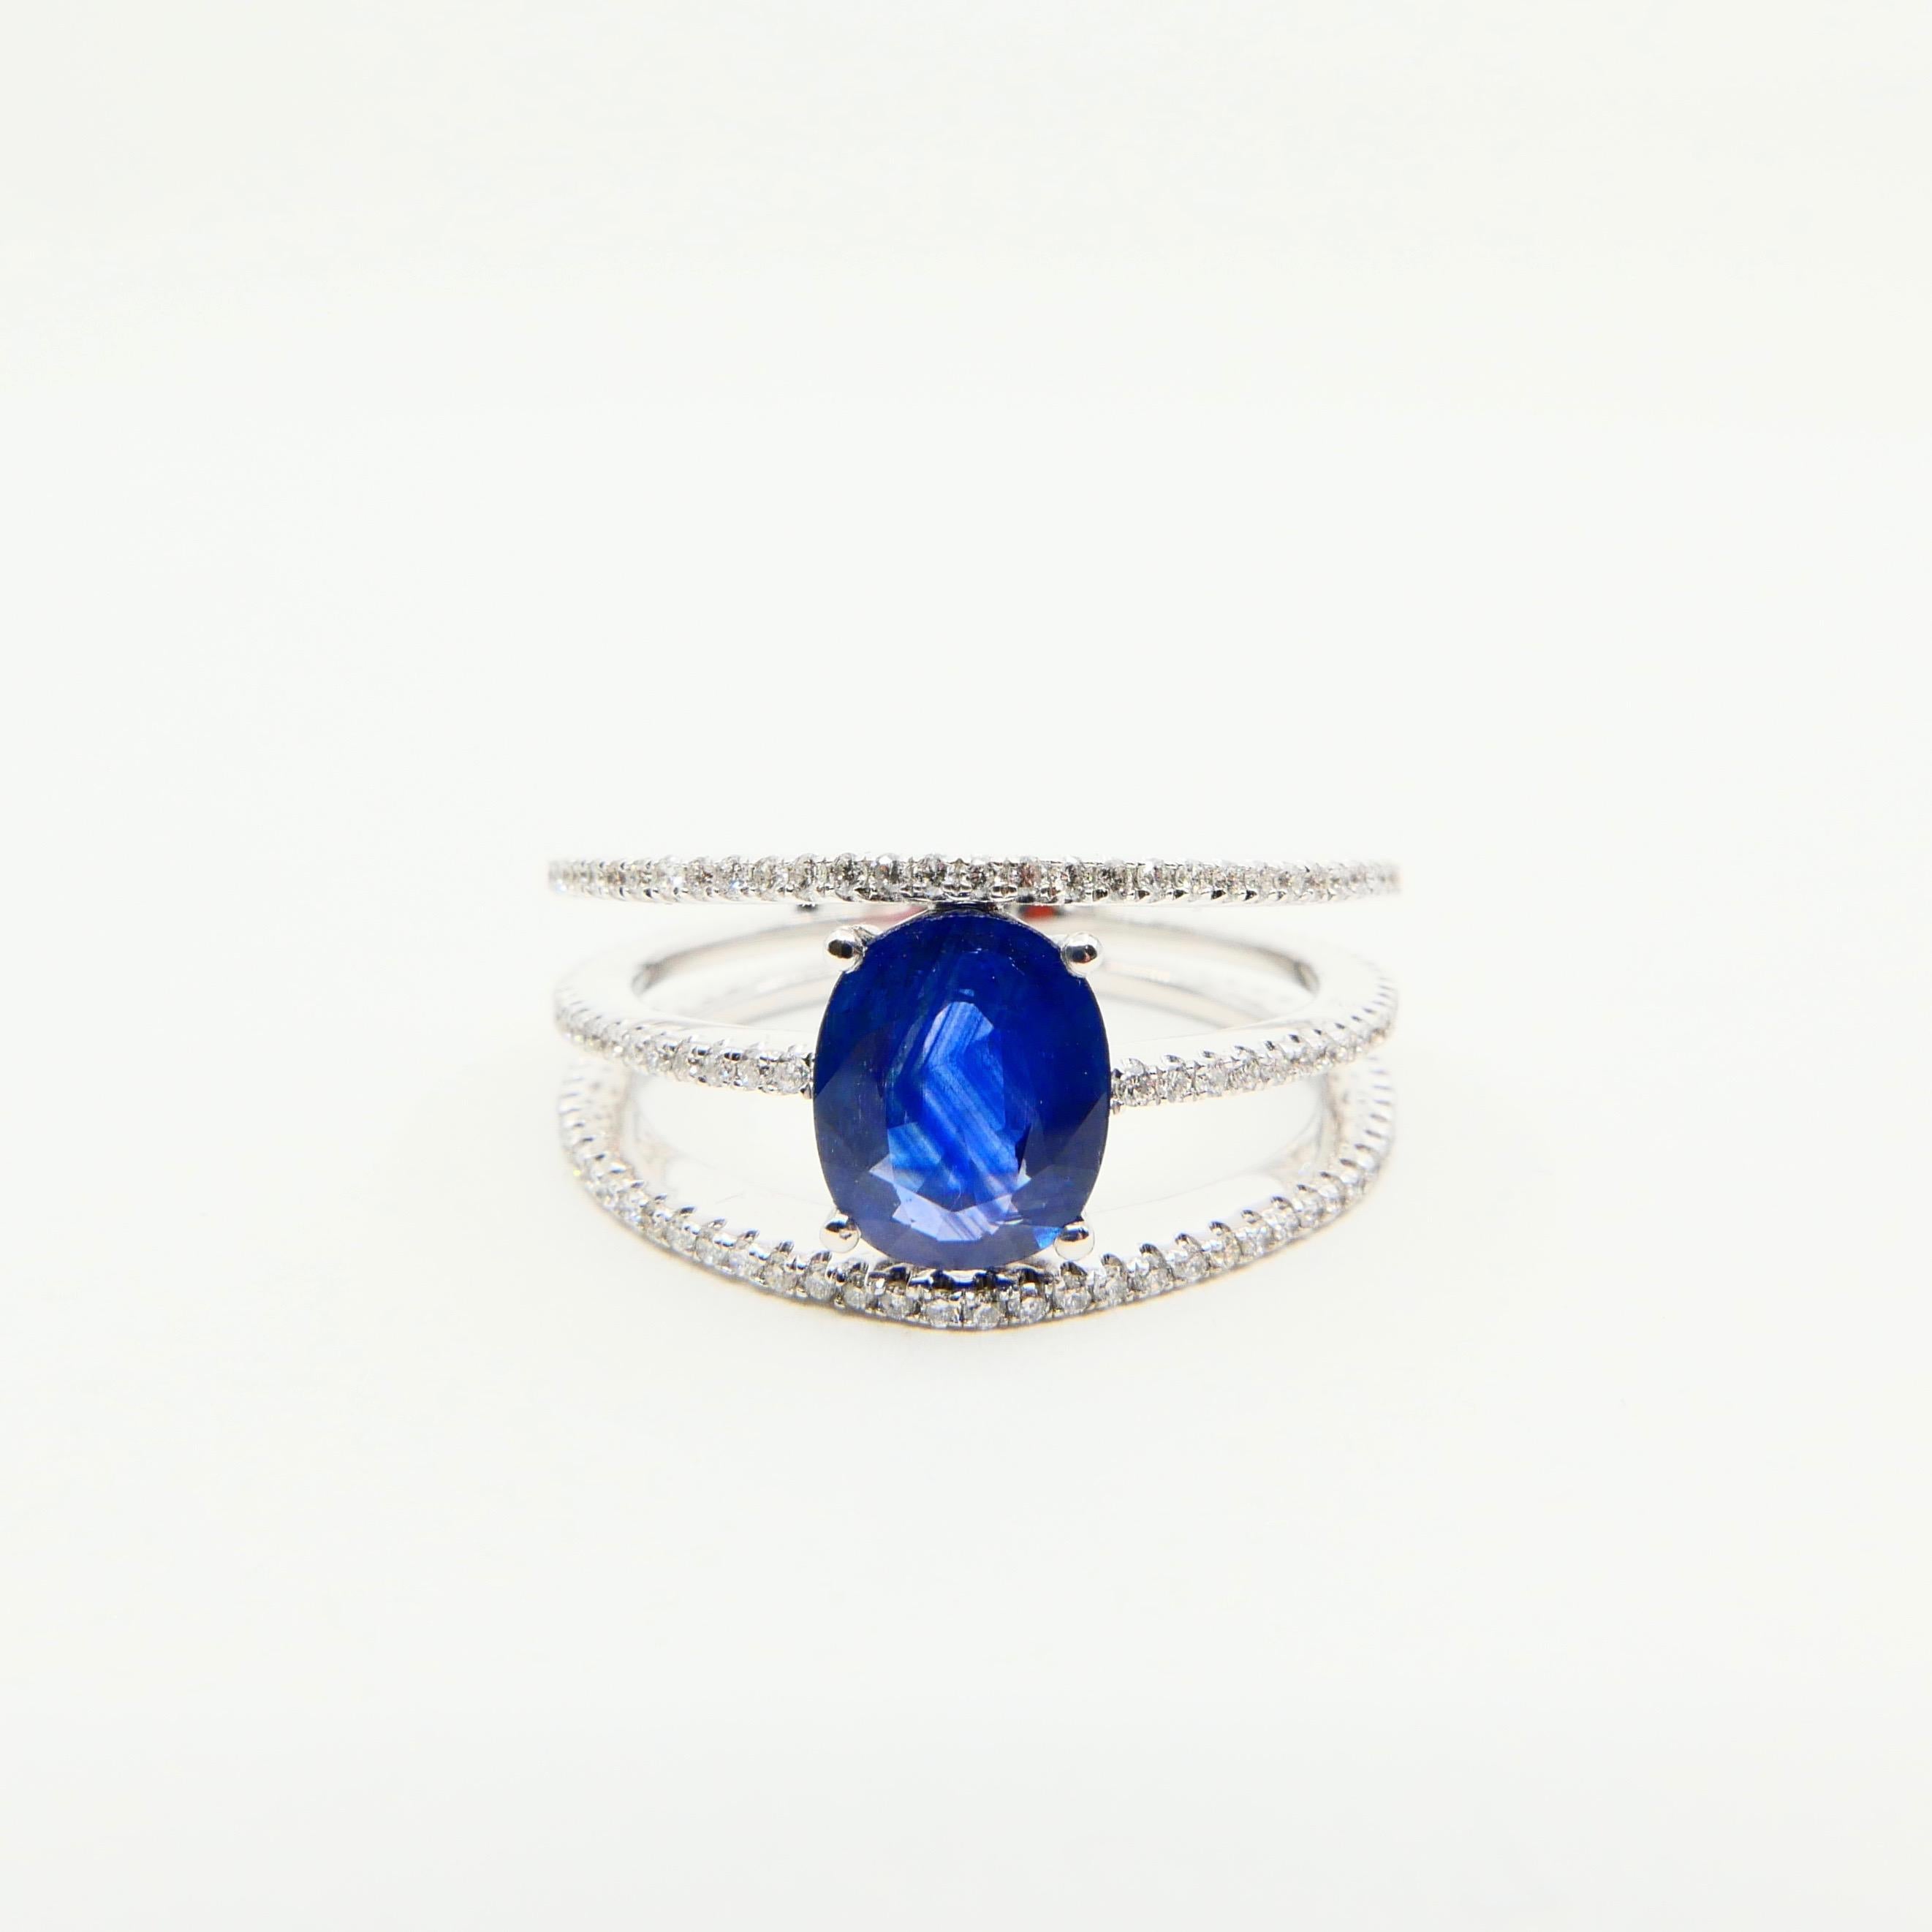 Blue Sapphire and Diamond Cocktail Ring, 3 Rows Design, 18 Karat White Gold For Sale 4